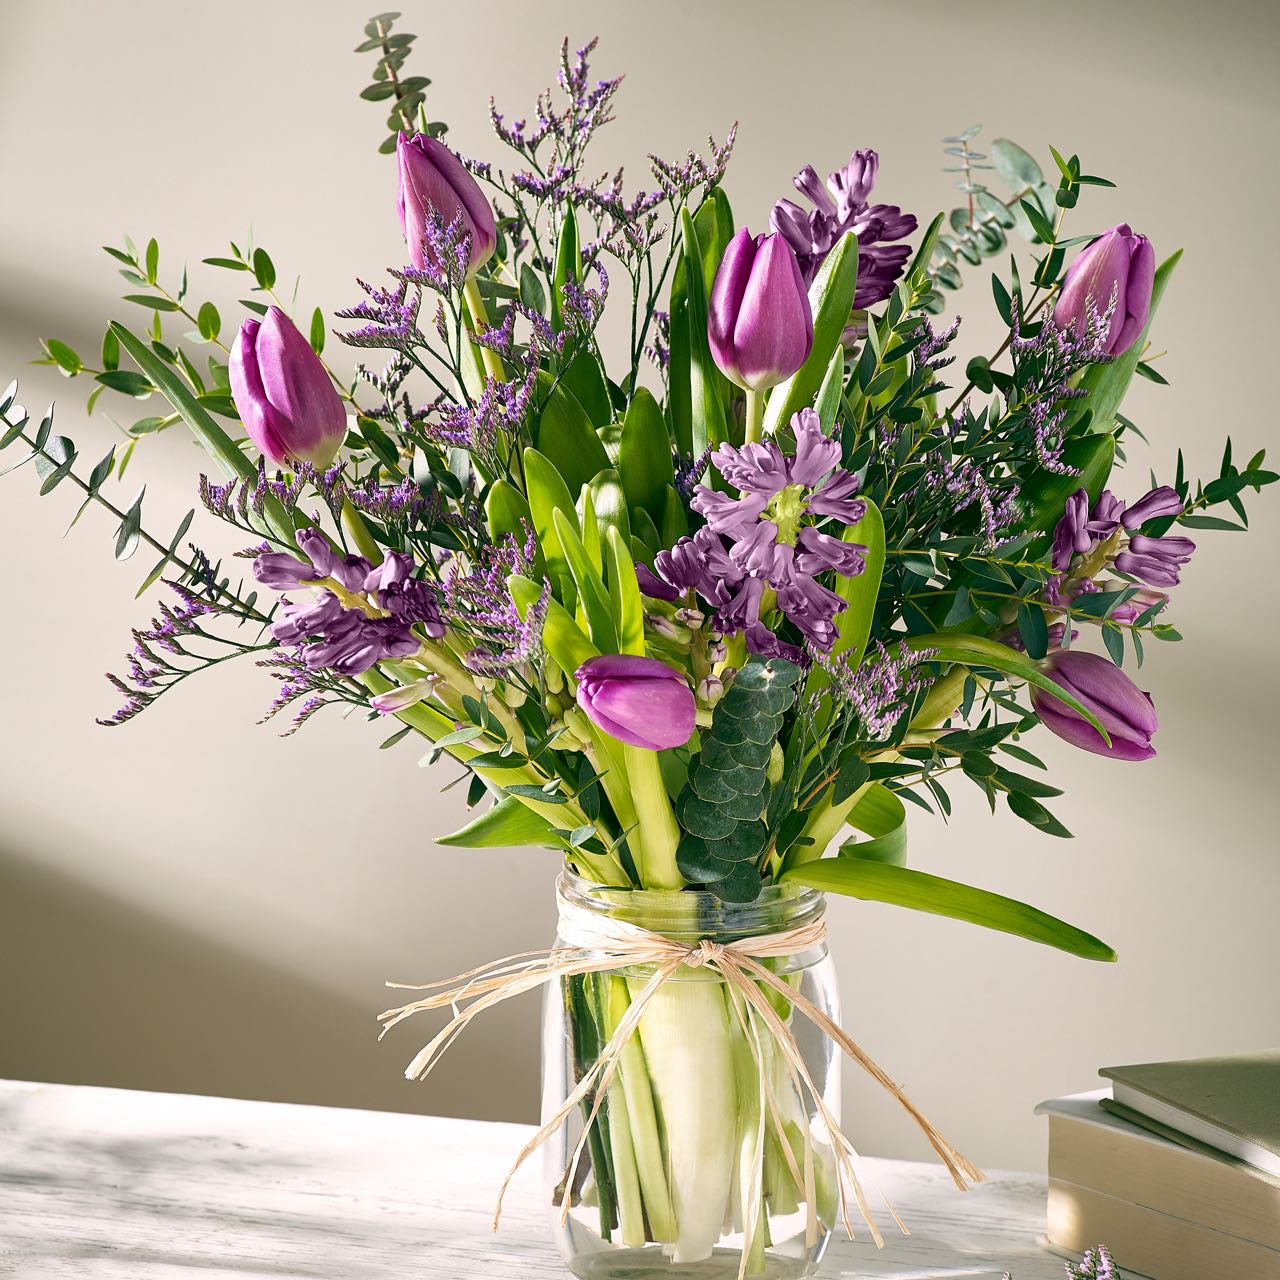 Flower Care Guide | How To Look After Flowers | Next UK